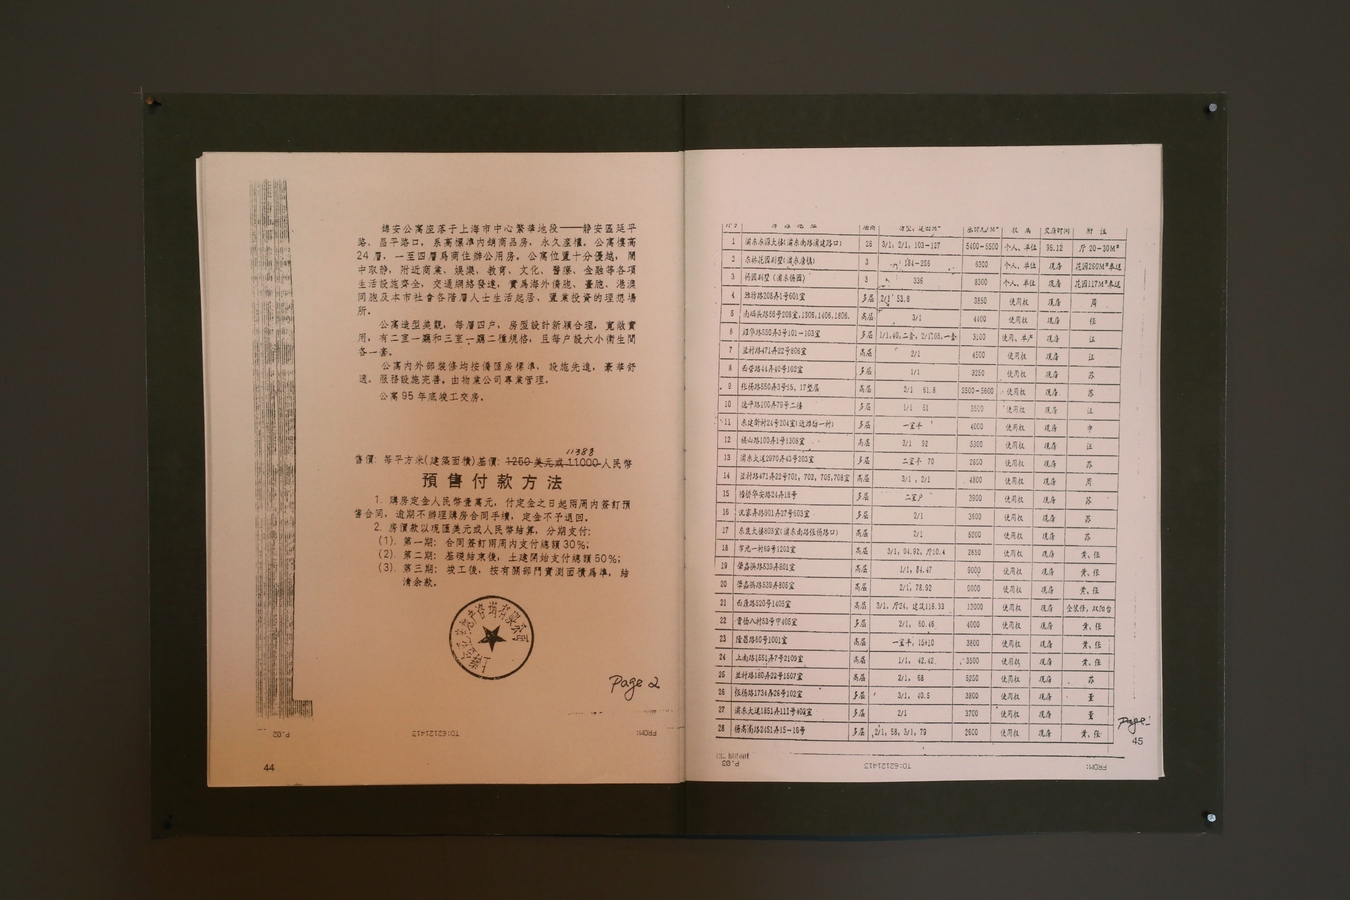 Selected reproductions from Reprint #2: Shanghai Fax (detail), collated by Fayen d’Evie and Caitlin Patane. Image: Daegan Wells.